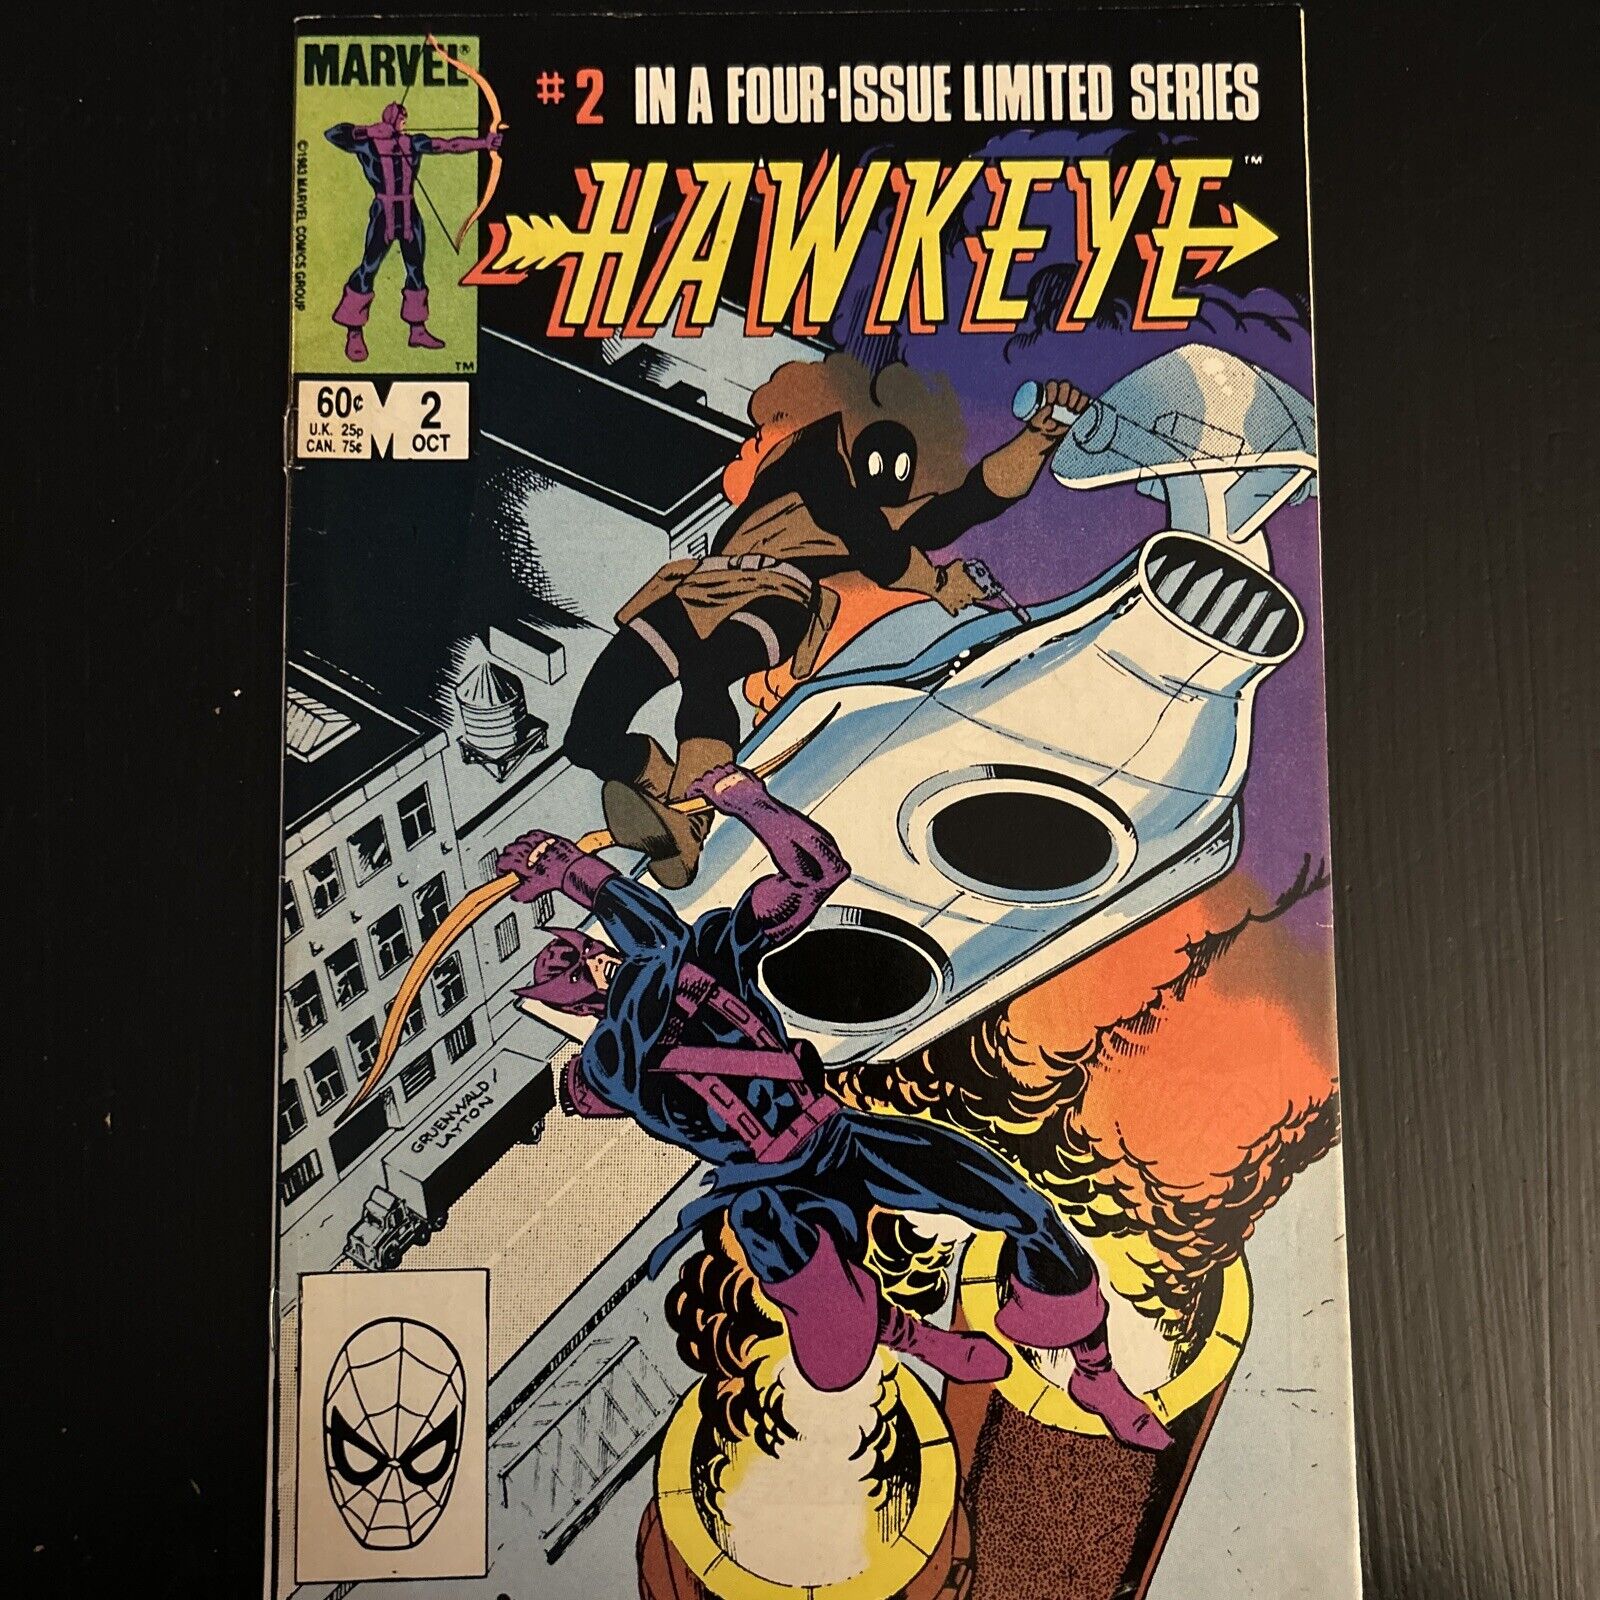 HAWKEYE #2 LIMITED SERIES MARVEL Comics Oct 1983 - Burger Time Mattel Back Page